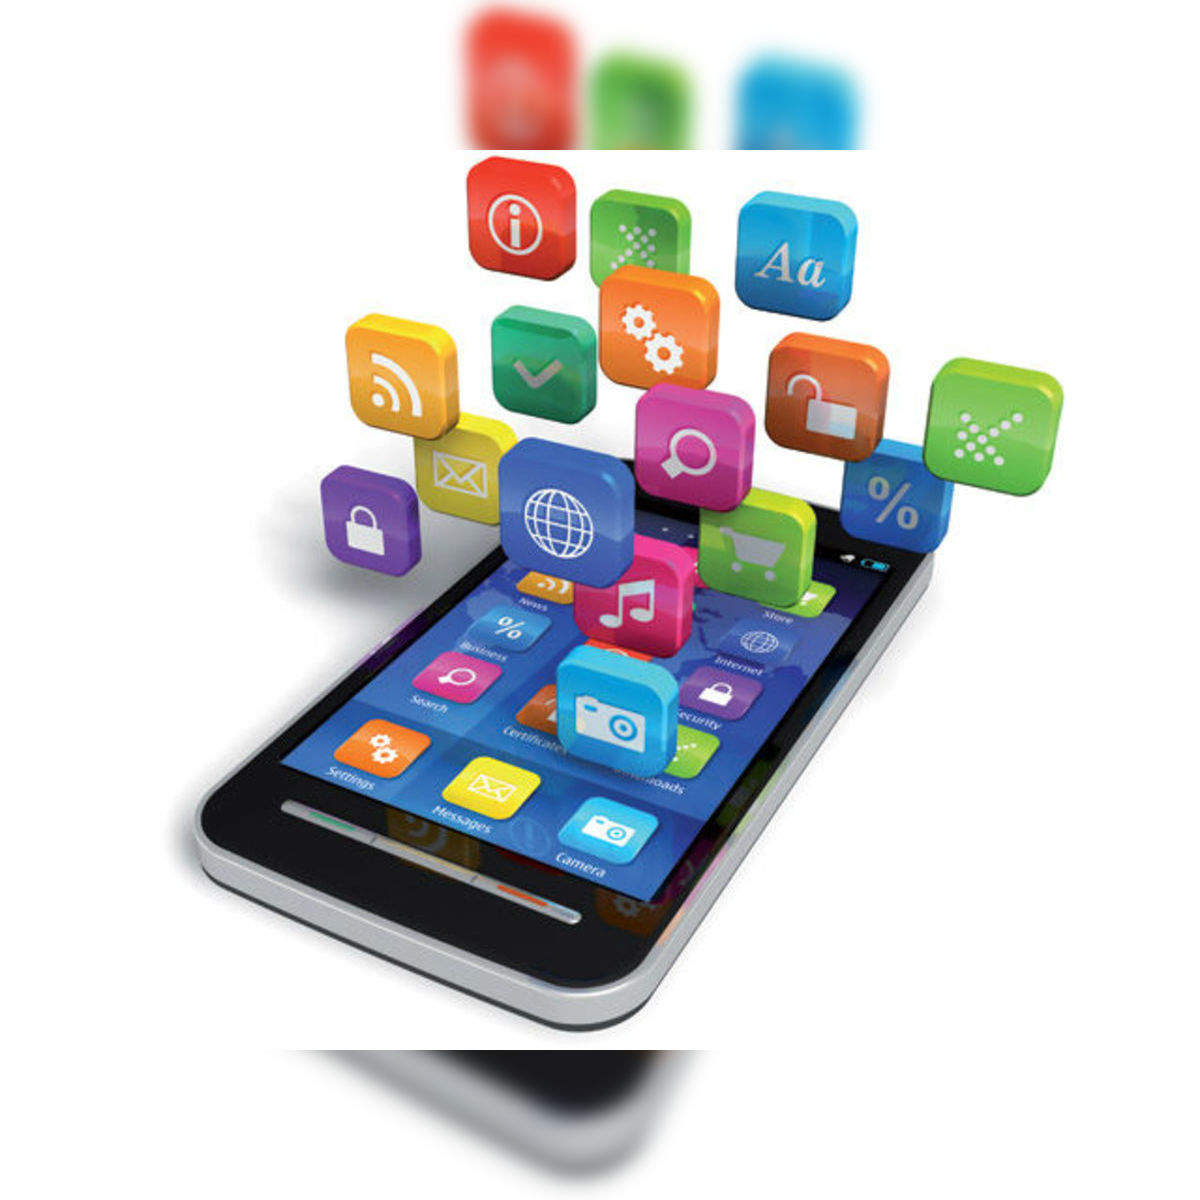 7 things mobile app developers should focus on - The Economic Times